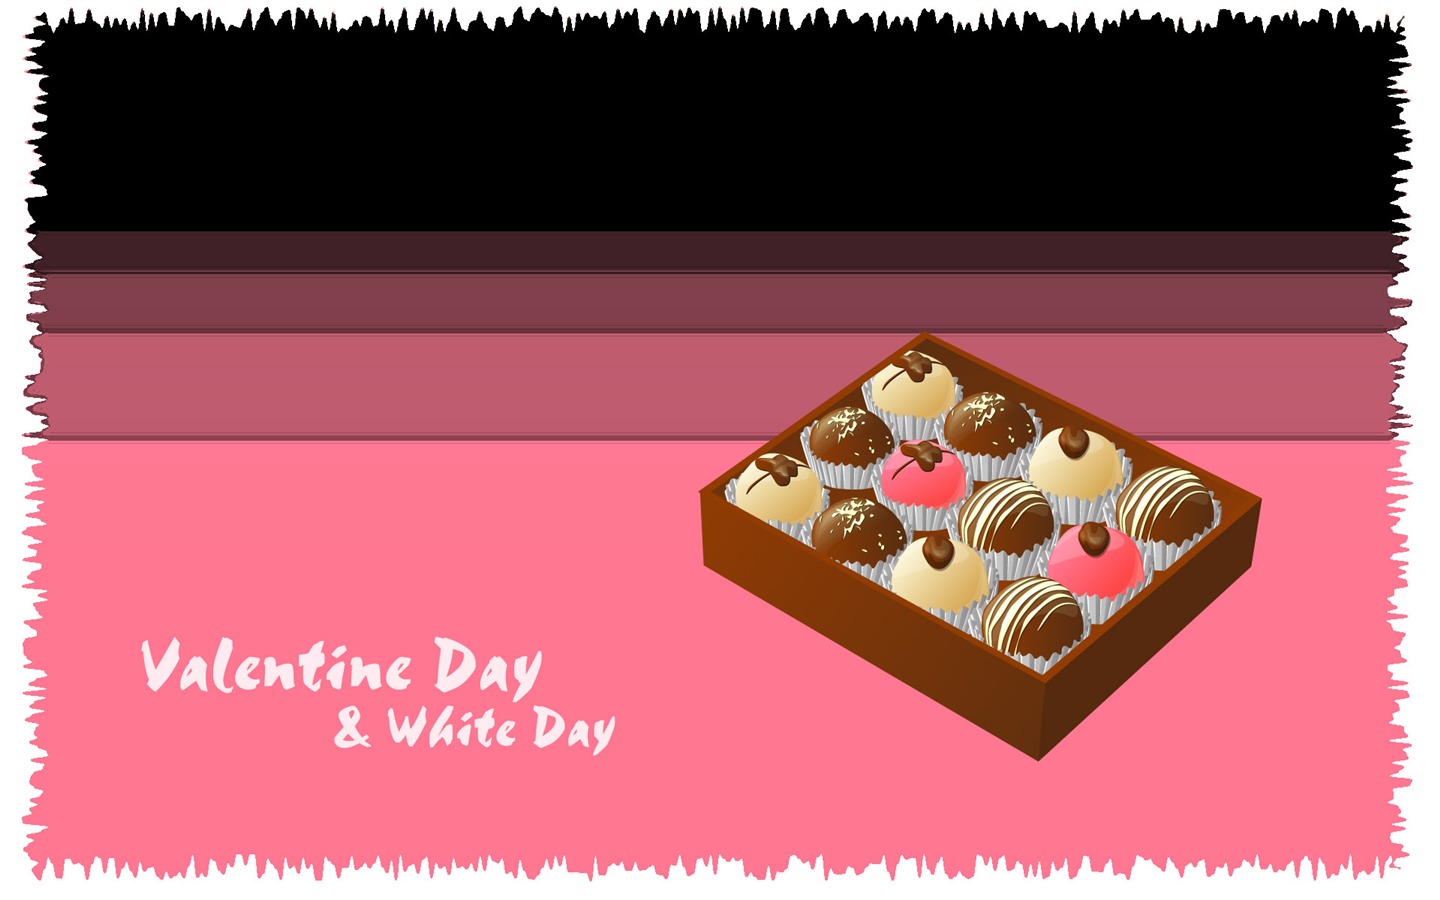 Valentine's Day Theme Wallpapers (1) #9 - 1440x900